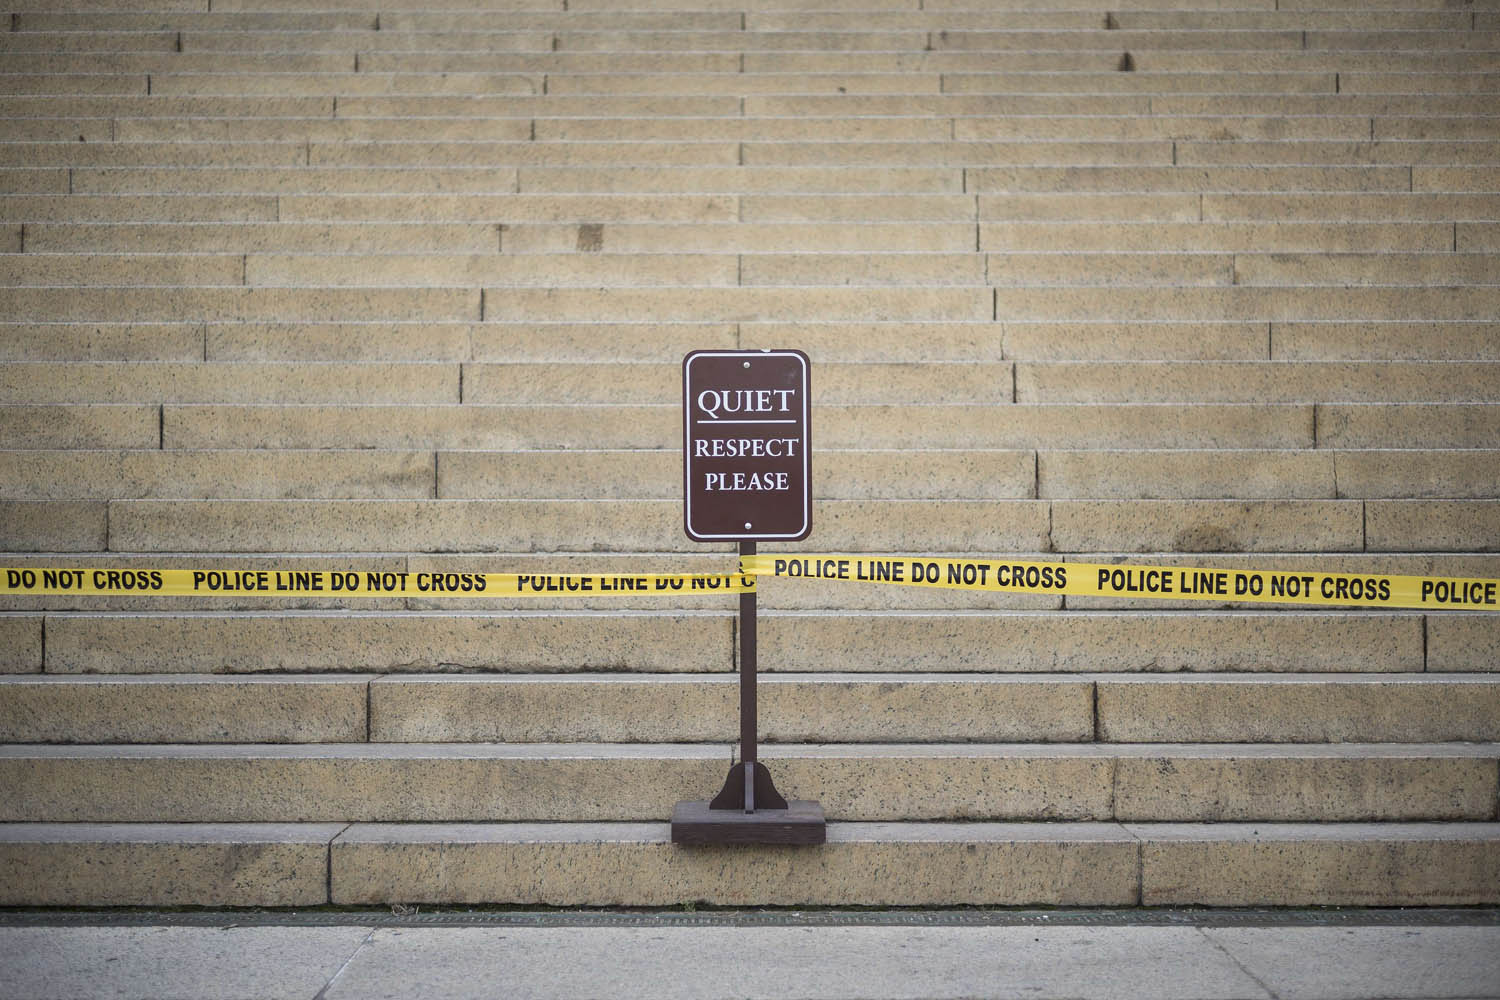 Oct. 1, 2013. Police tape blocks a closed Lincoln Memorial on the National Mall in Washington.